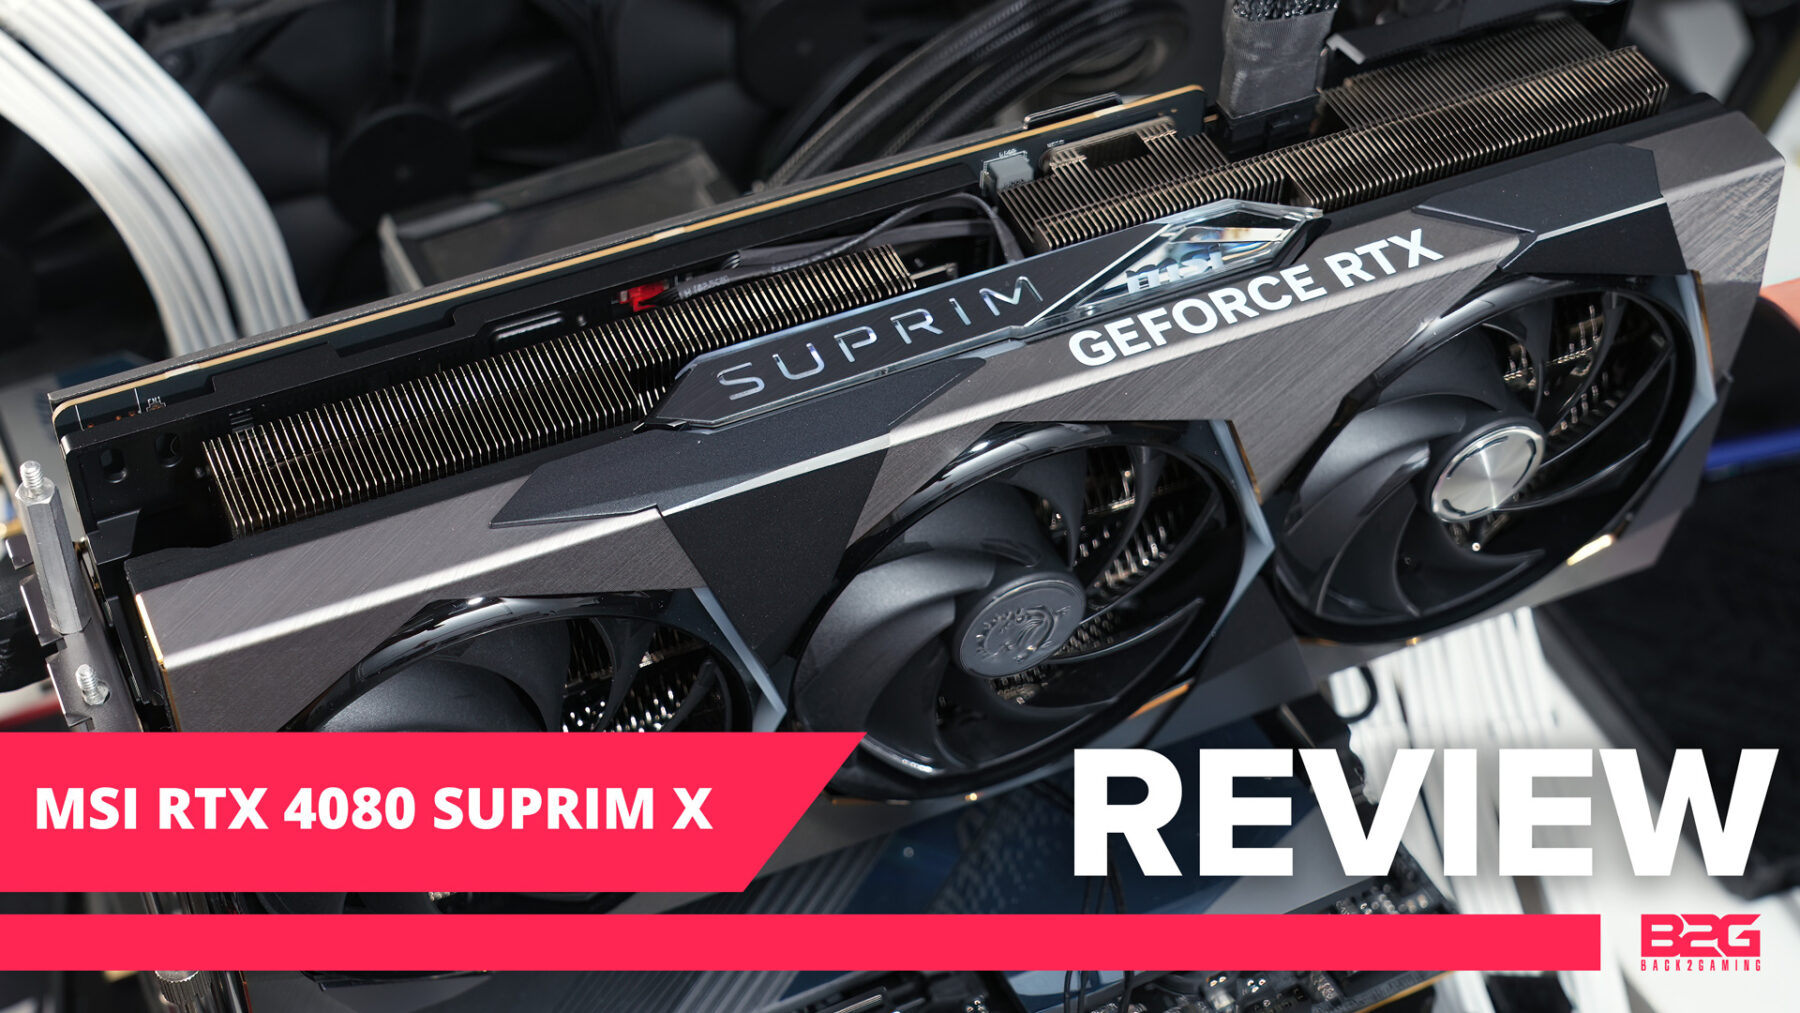 MSI RTX 4080 SUPRIM X 16GB Graphics Card Review | Back2Gaming